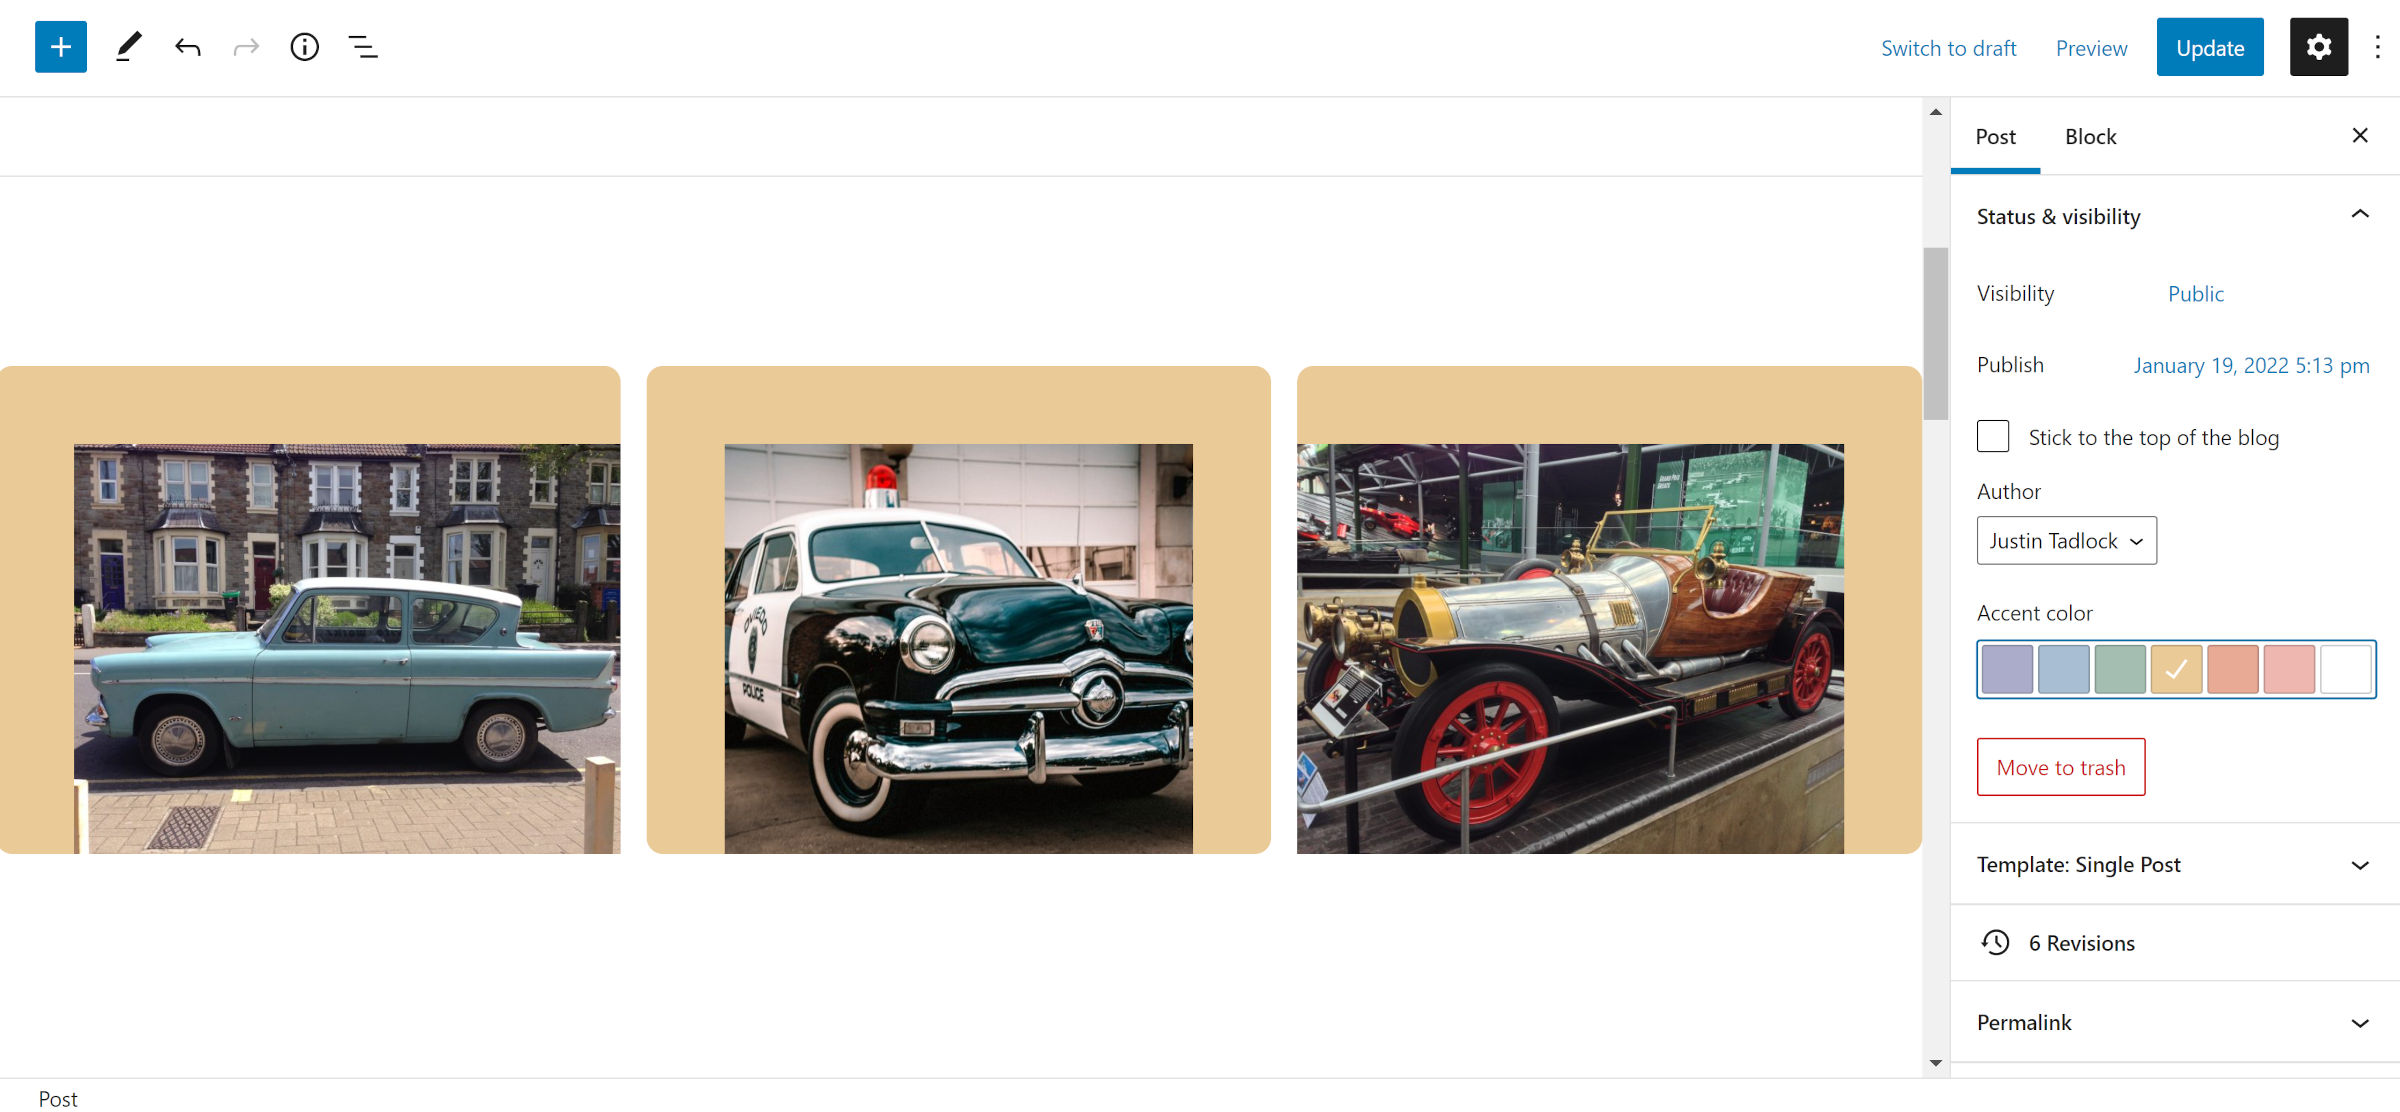 A gallery of three car images, each image is uniquely positioned in a container box at the bottom right, center and left.